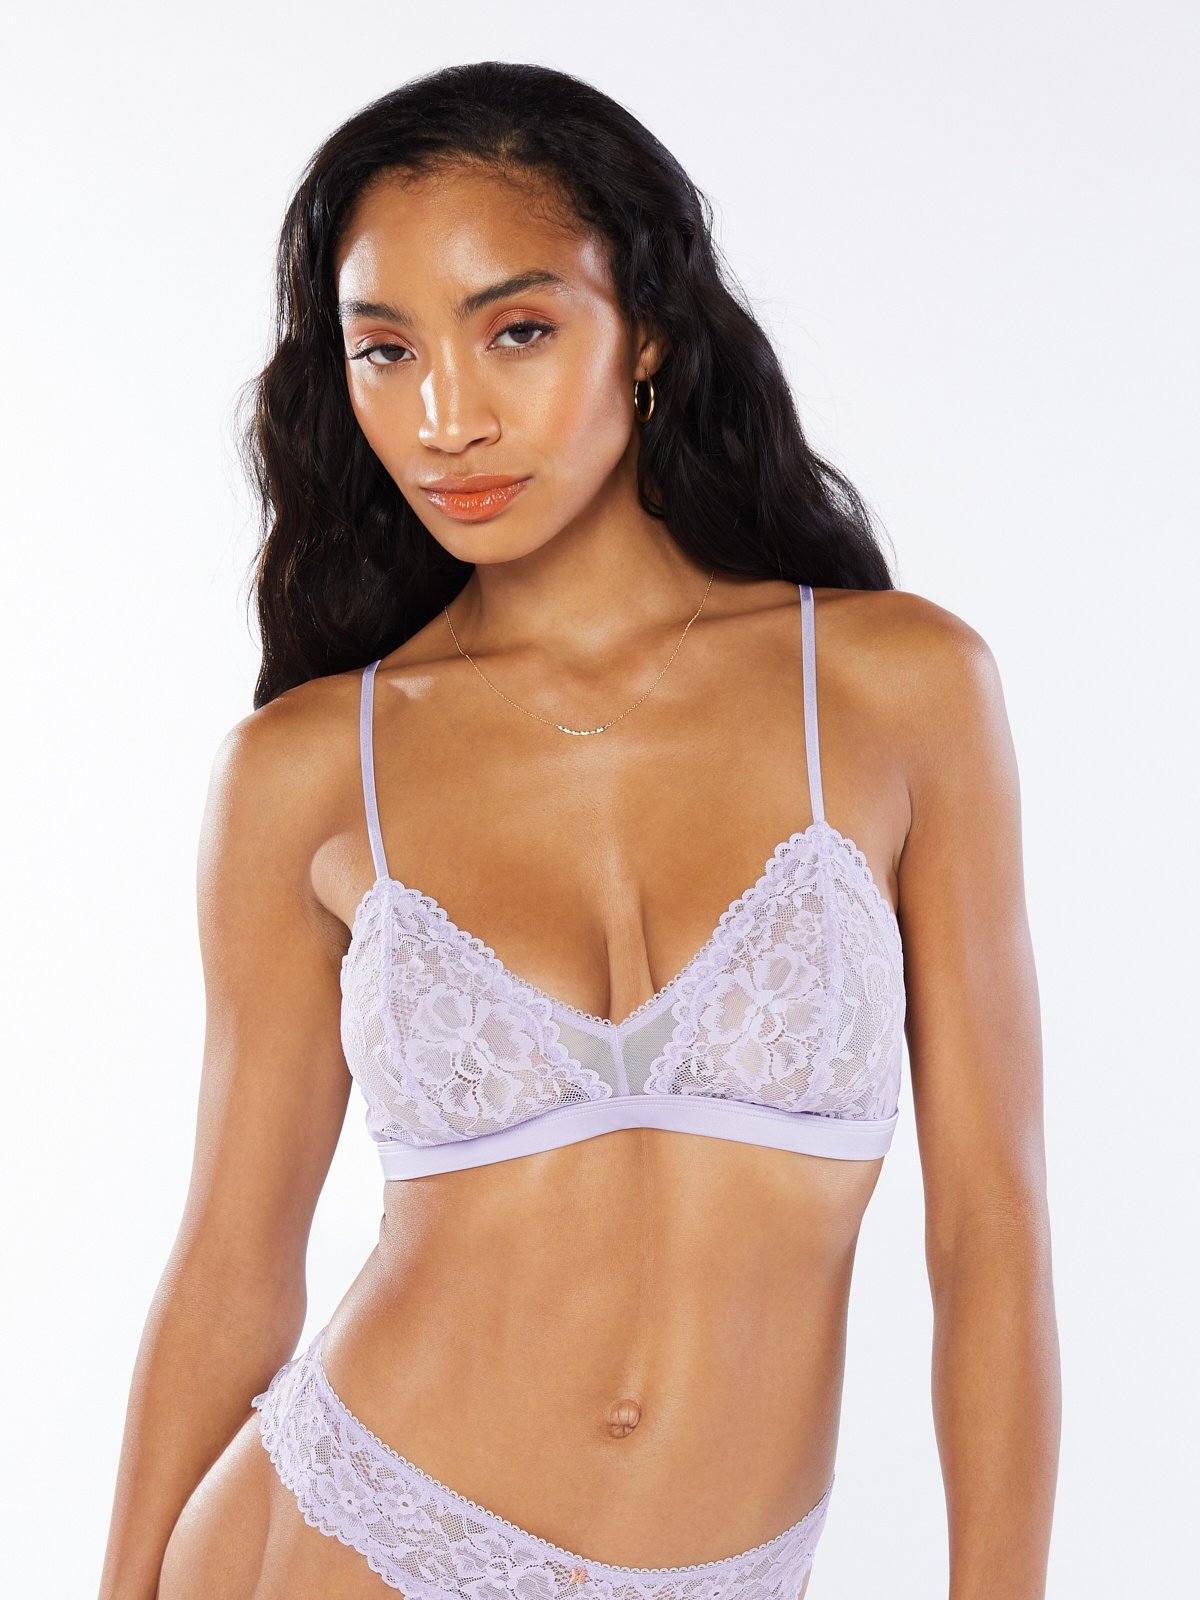 SEXY X-back Mesh With Lace PURPLE Bralette Back Criss Cross Straps